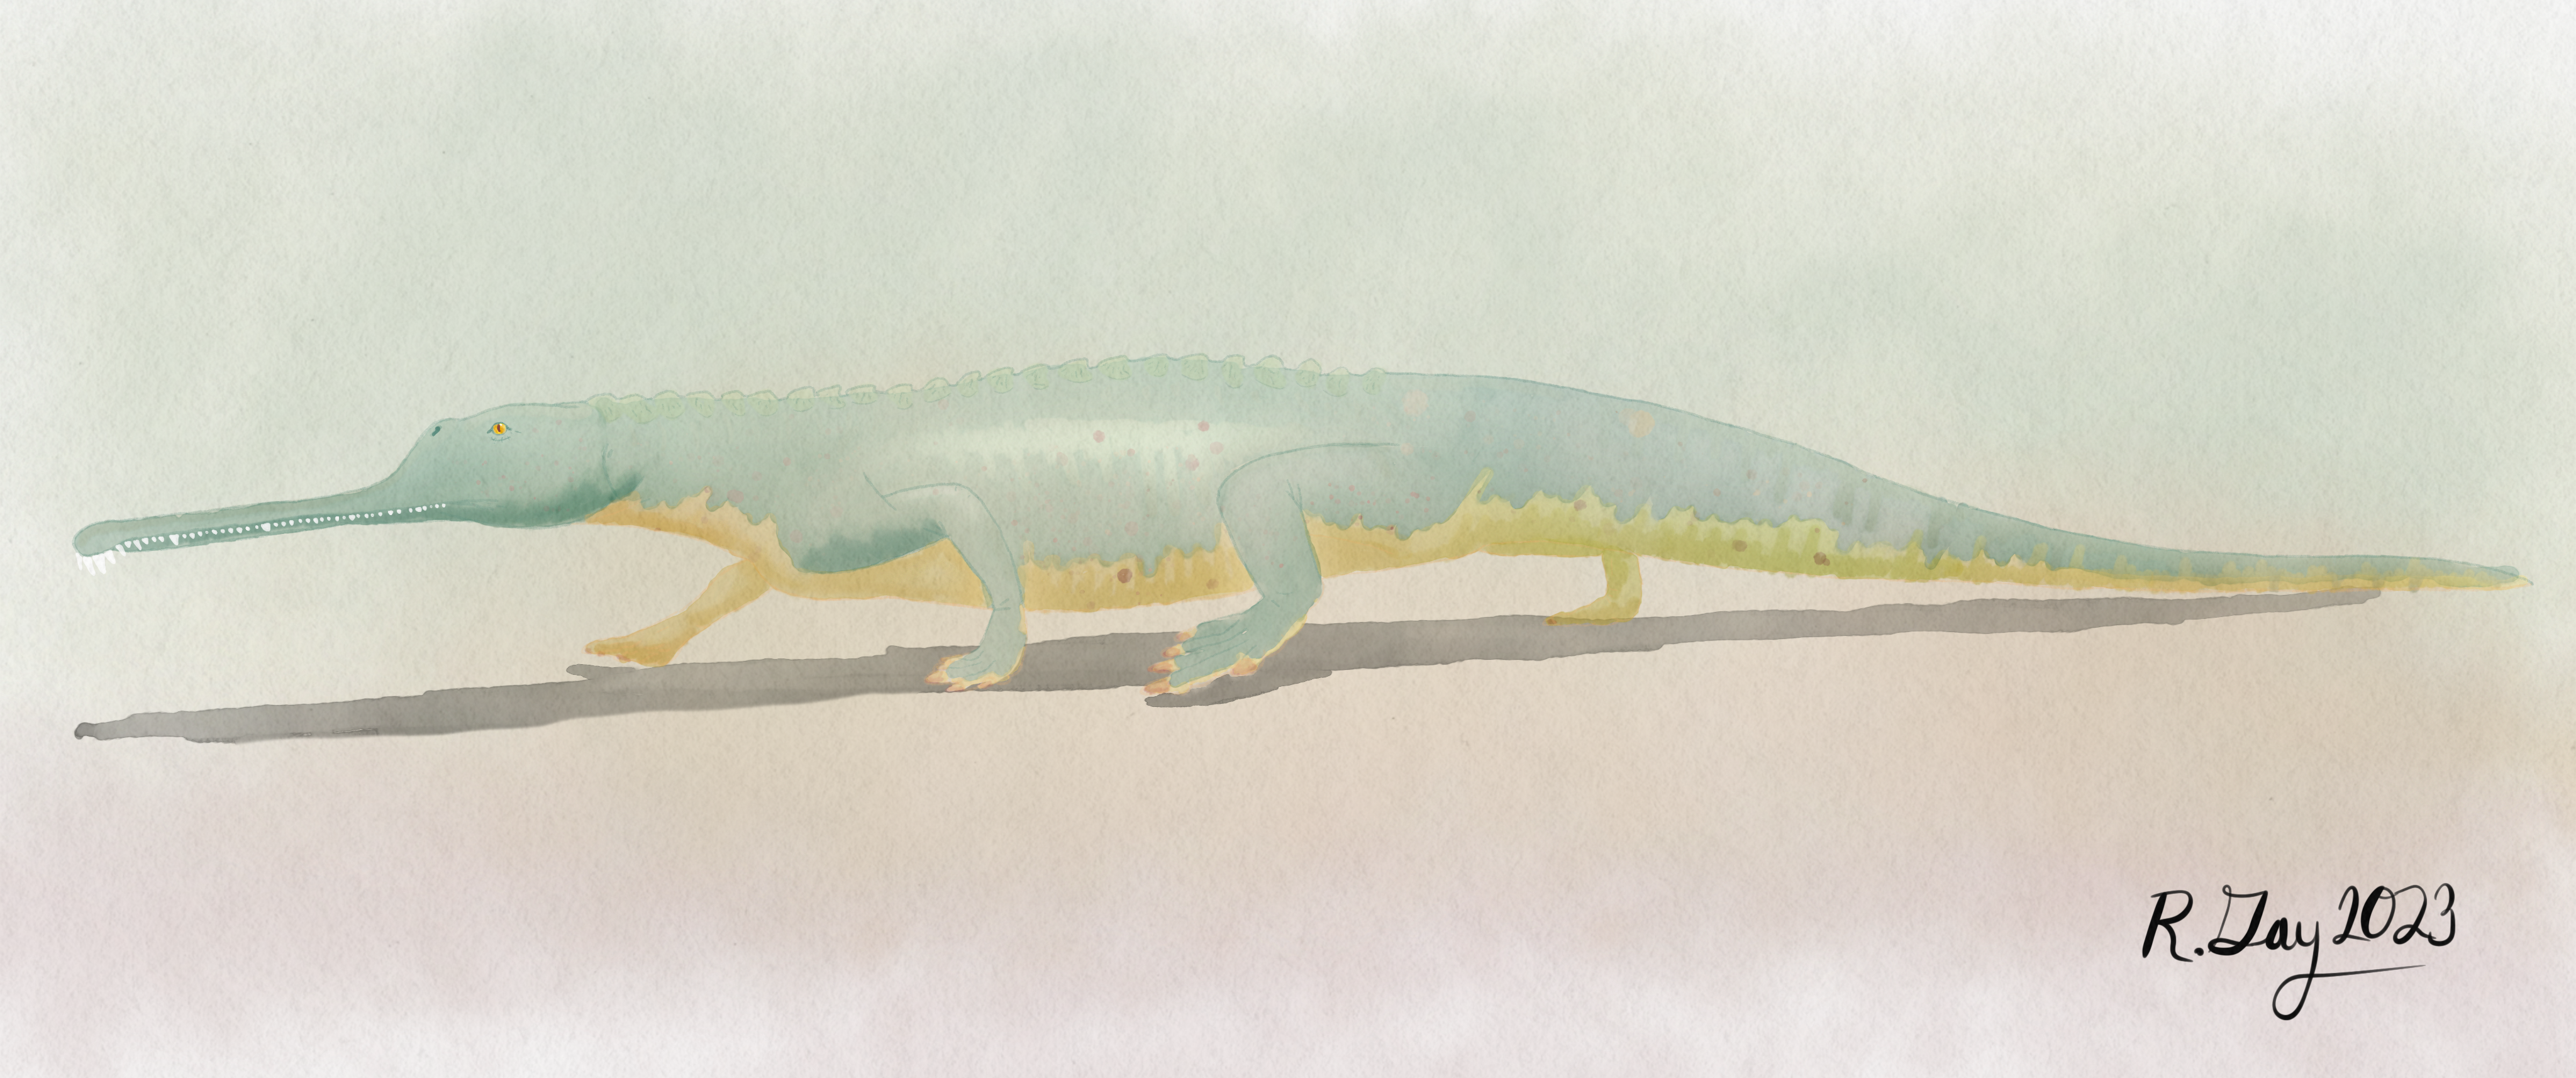 A reconstruction of a phytosaur similar to the kind found by the team.